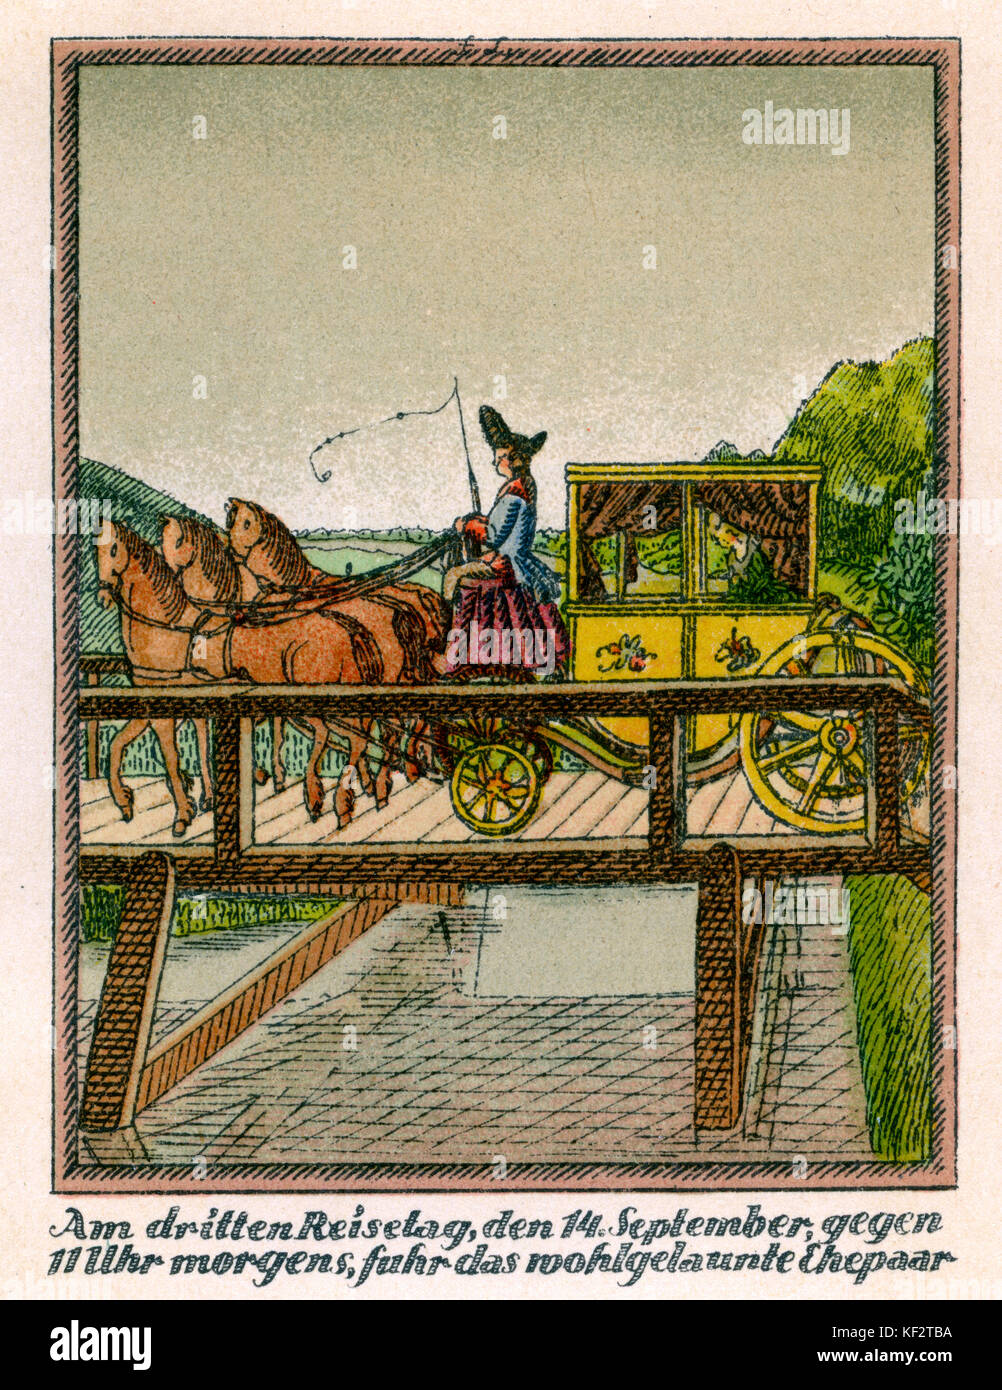 Mozart 's Journey to Prague, 1856. Fictional account of Mozart's journey with his wife Constanze in Autumn 1787 to Prague, where his opera Don Giovanni was to premiere. Caption reads: 'Am dritten Reisetag, den 14 September, gegen 11 Uhr morgens, fuhr das wohlgelaunte Ehepaar' ['On the third day of the journey, the 14th of September, at 11 o'clock in the morning, the good-humoured couple setting off']. Novella published 1856. EM:  German romantic poet and author, 8 September 1804 – 4 June 1875. WAM: Austrian composer, 27 January 1756 - 5 December 1791. Stock Photo